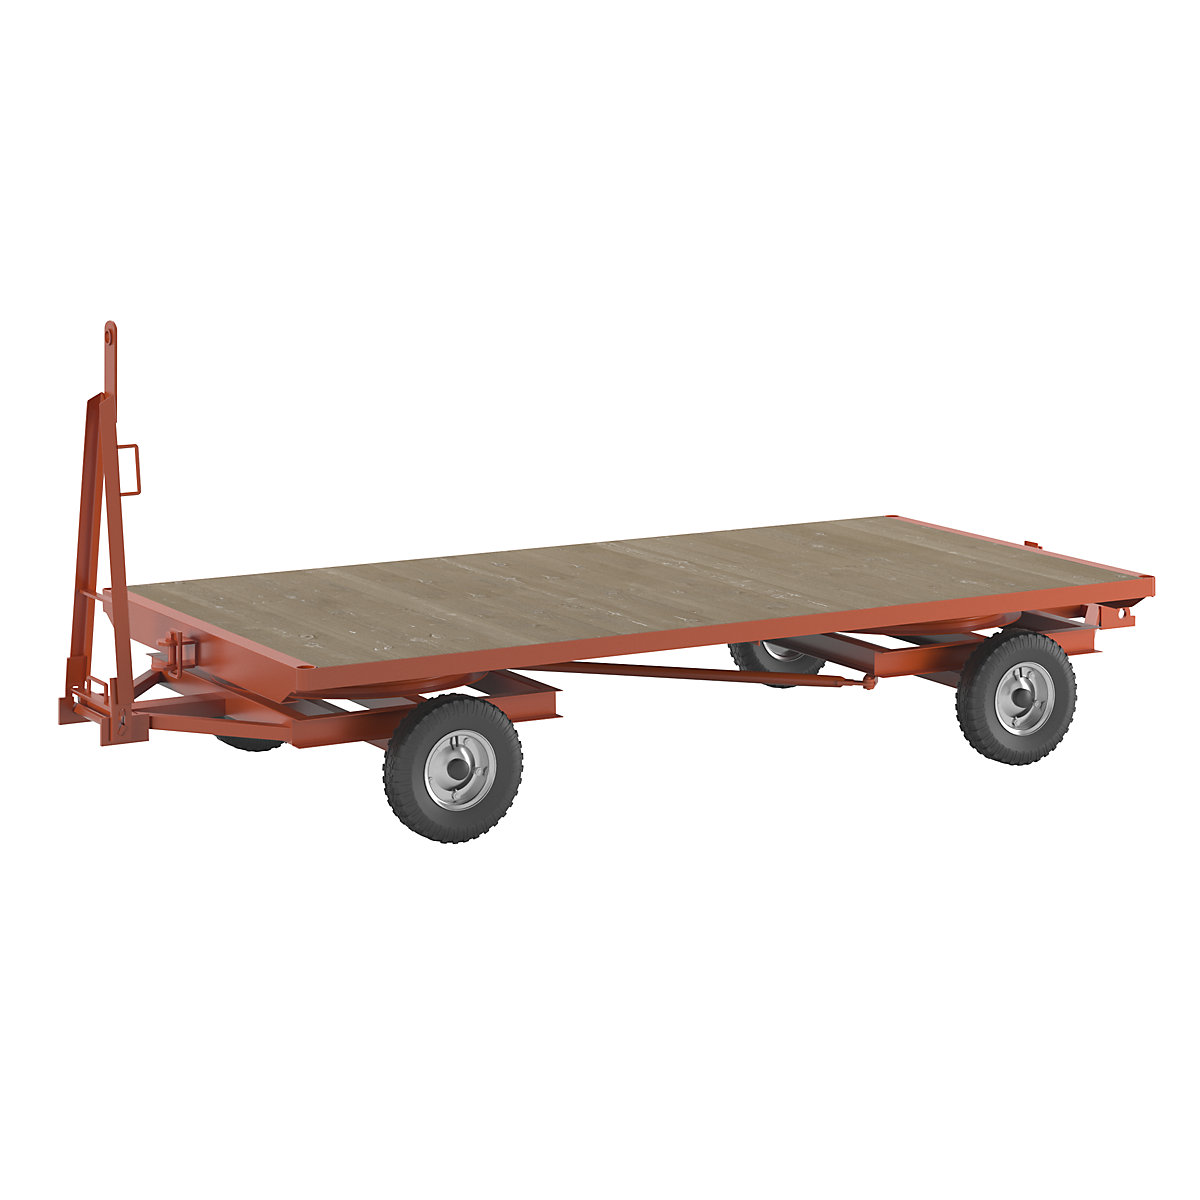 Trailer, 4-wheel double turntable steering, max. load 3 t, platform 3.0 x 1.5 m, pneumatic tyres-7